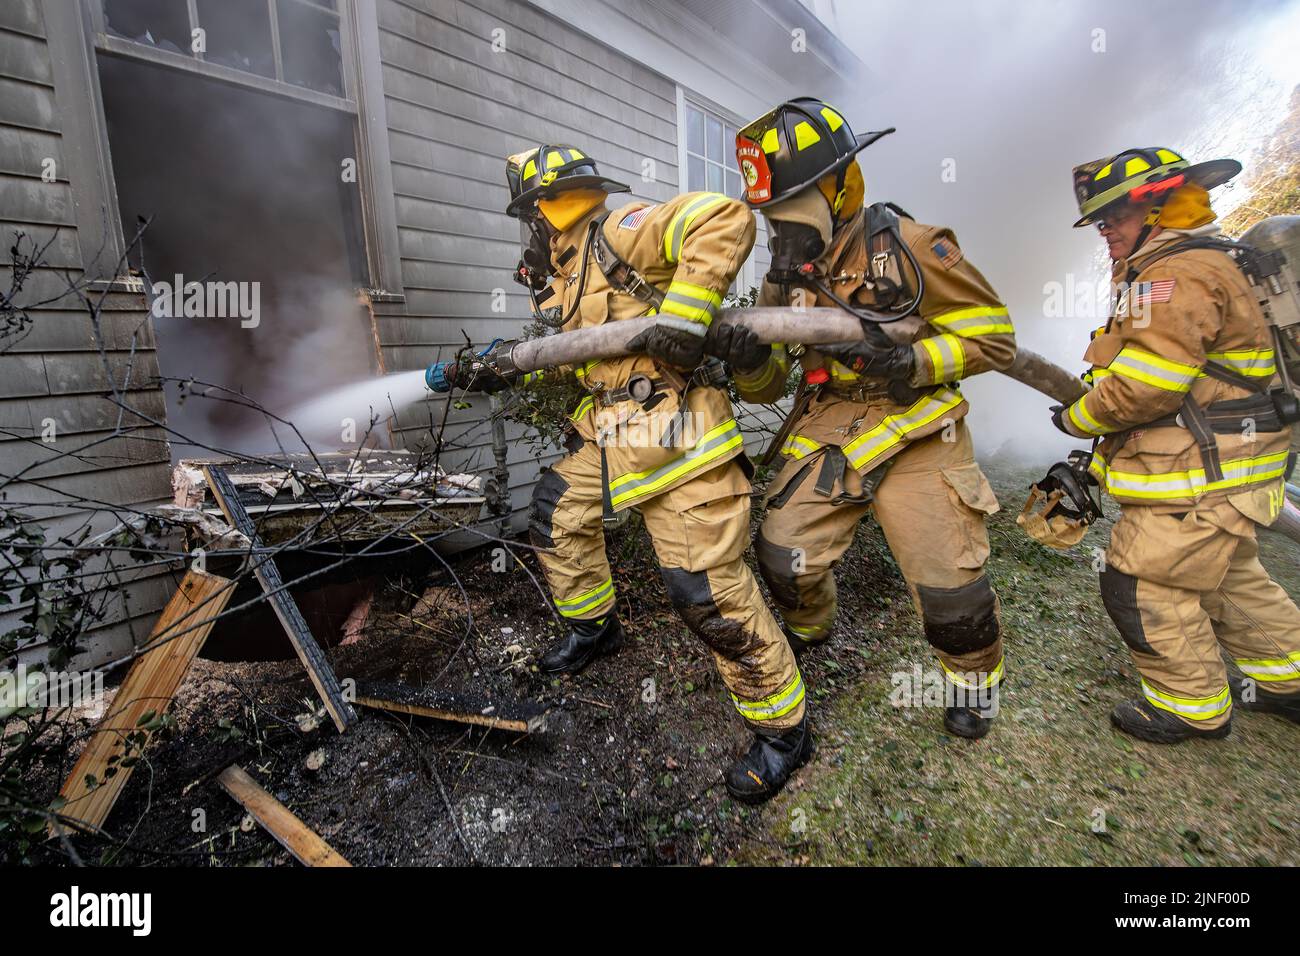 A three-man hose team uses a hose to spray water through a window to try to extinguish the fire within it as the Bridgehampton Fire Department, with m Stock Photo